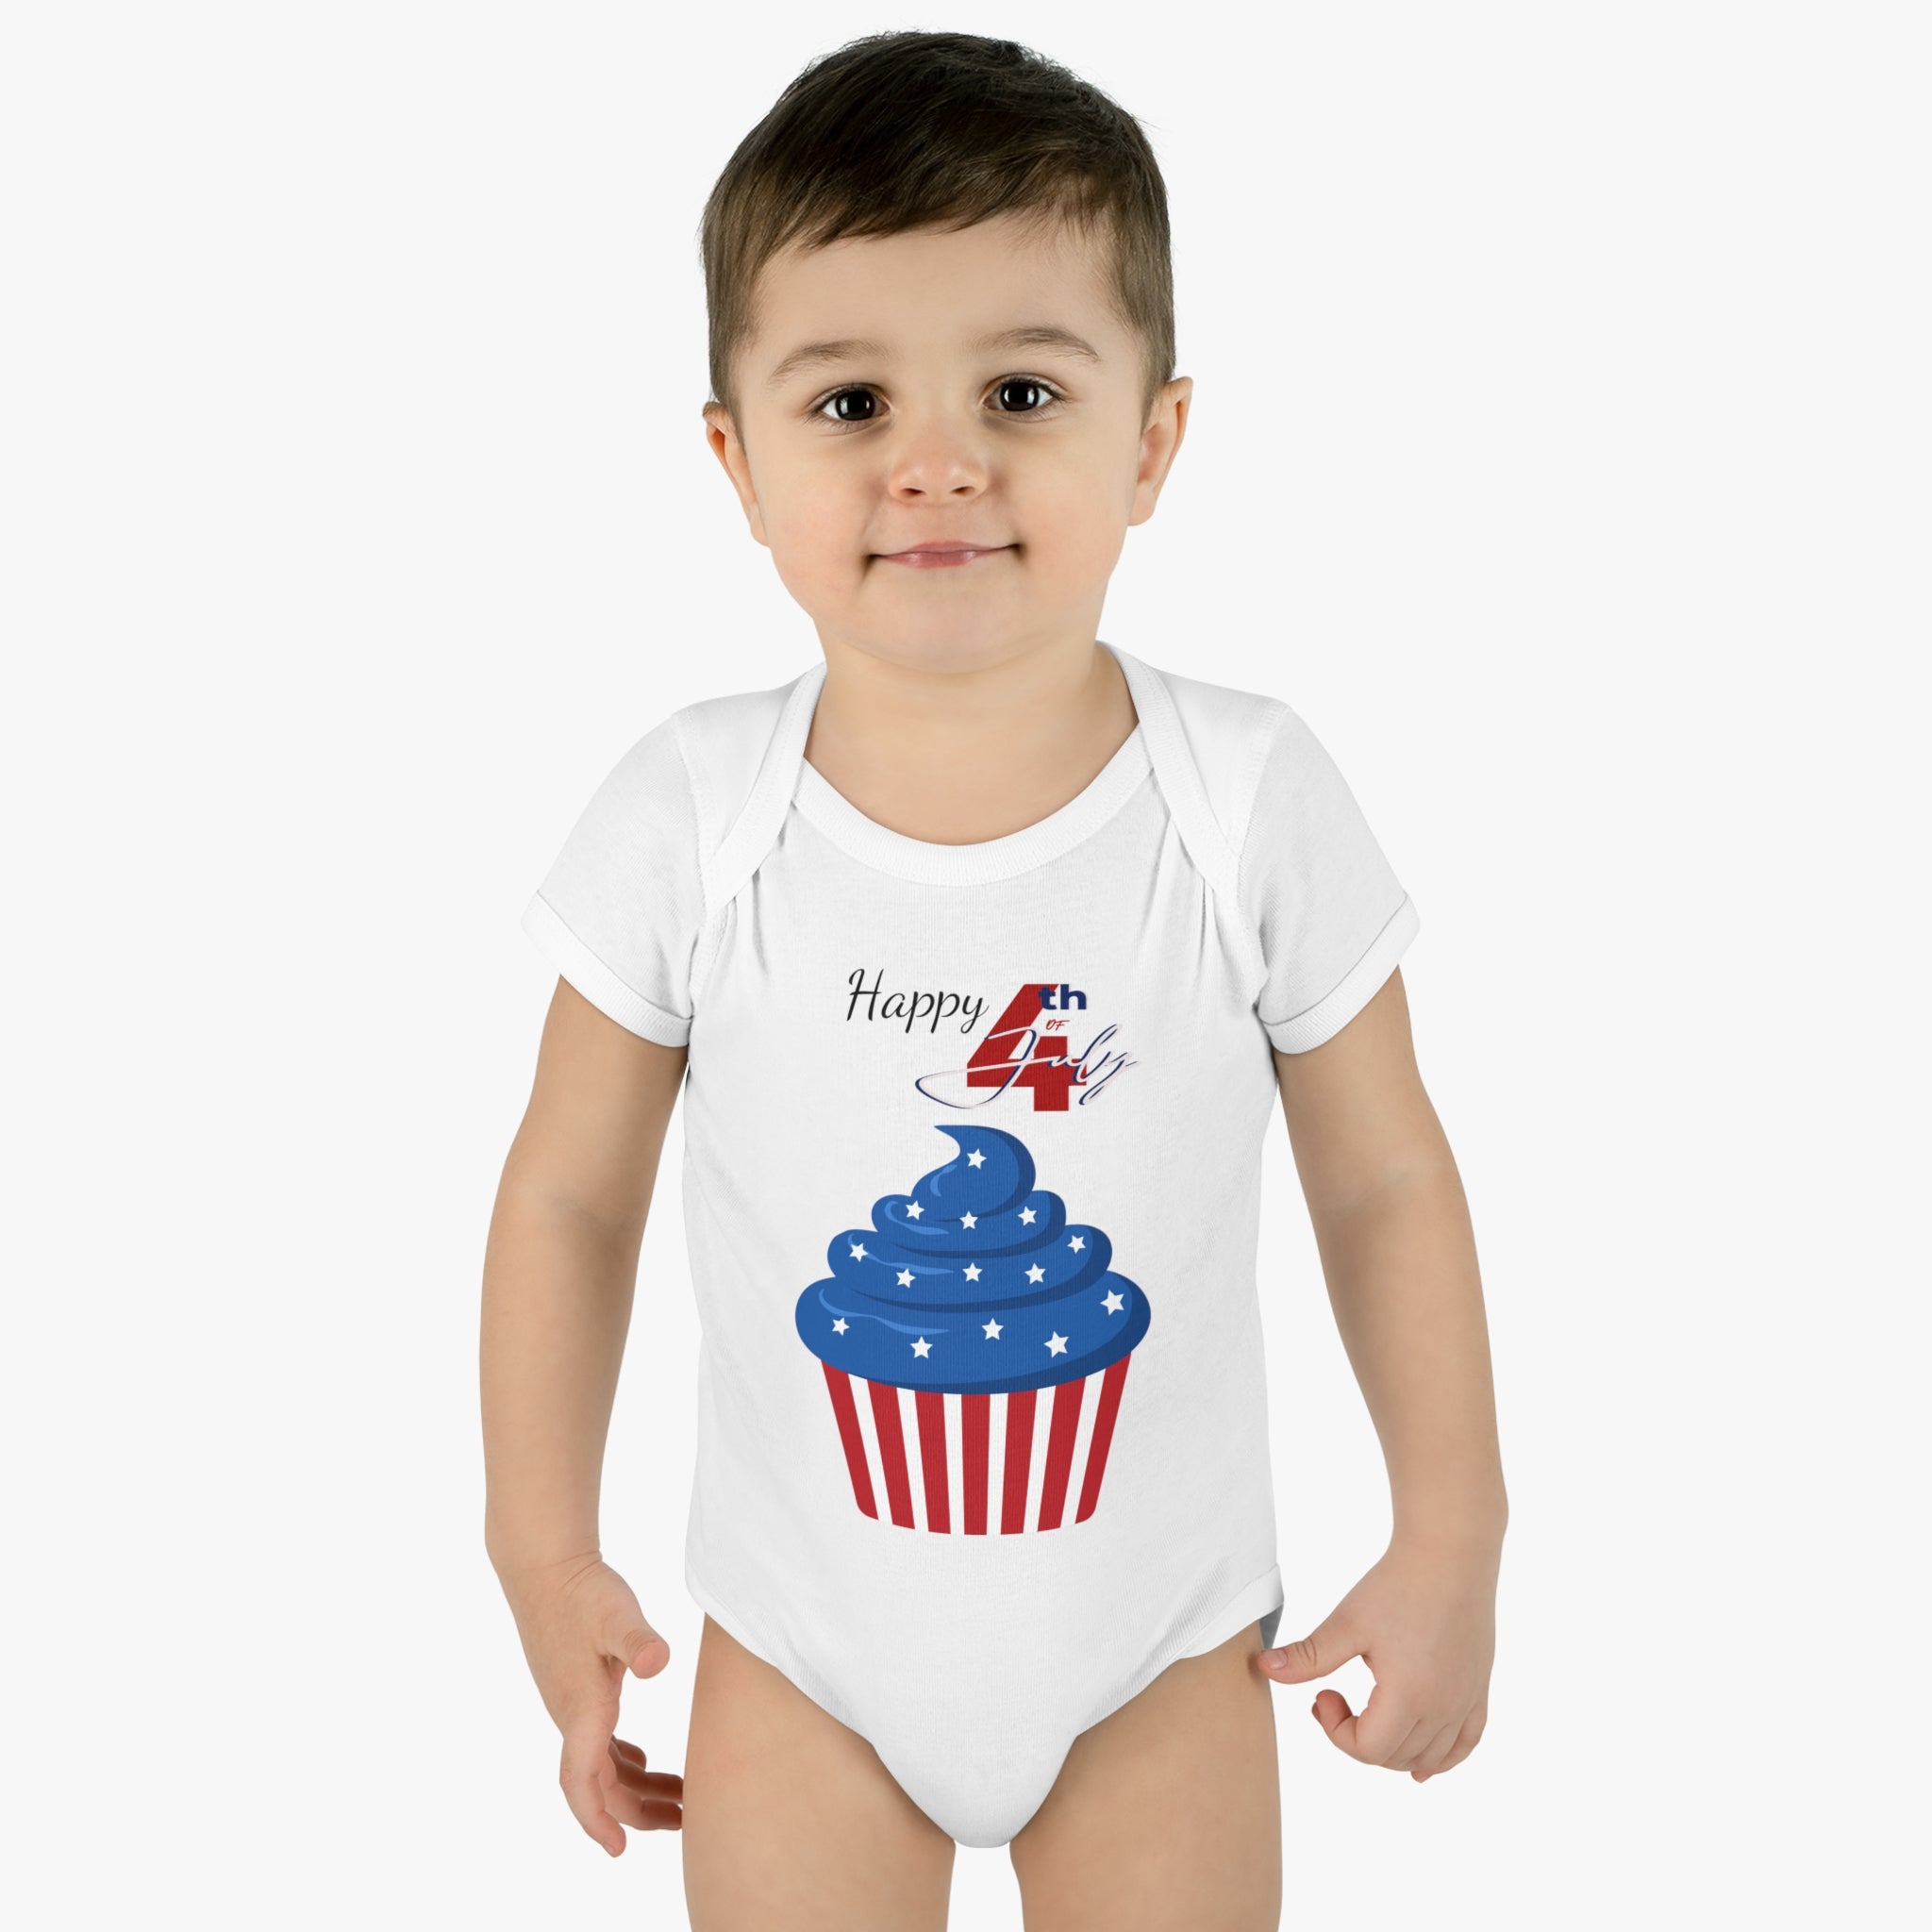 Happy 4th of July Cupcake Baby Bodysuit